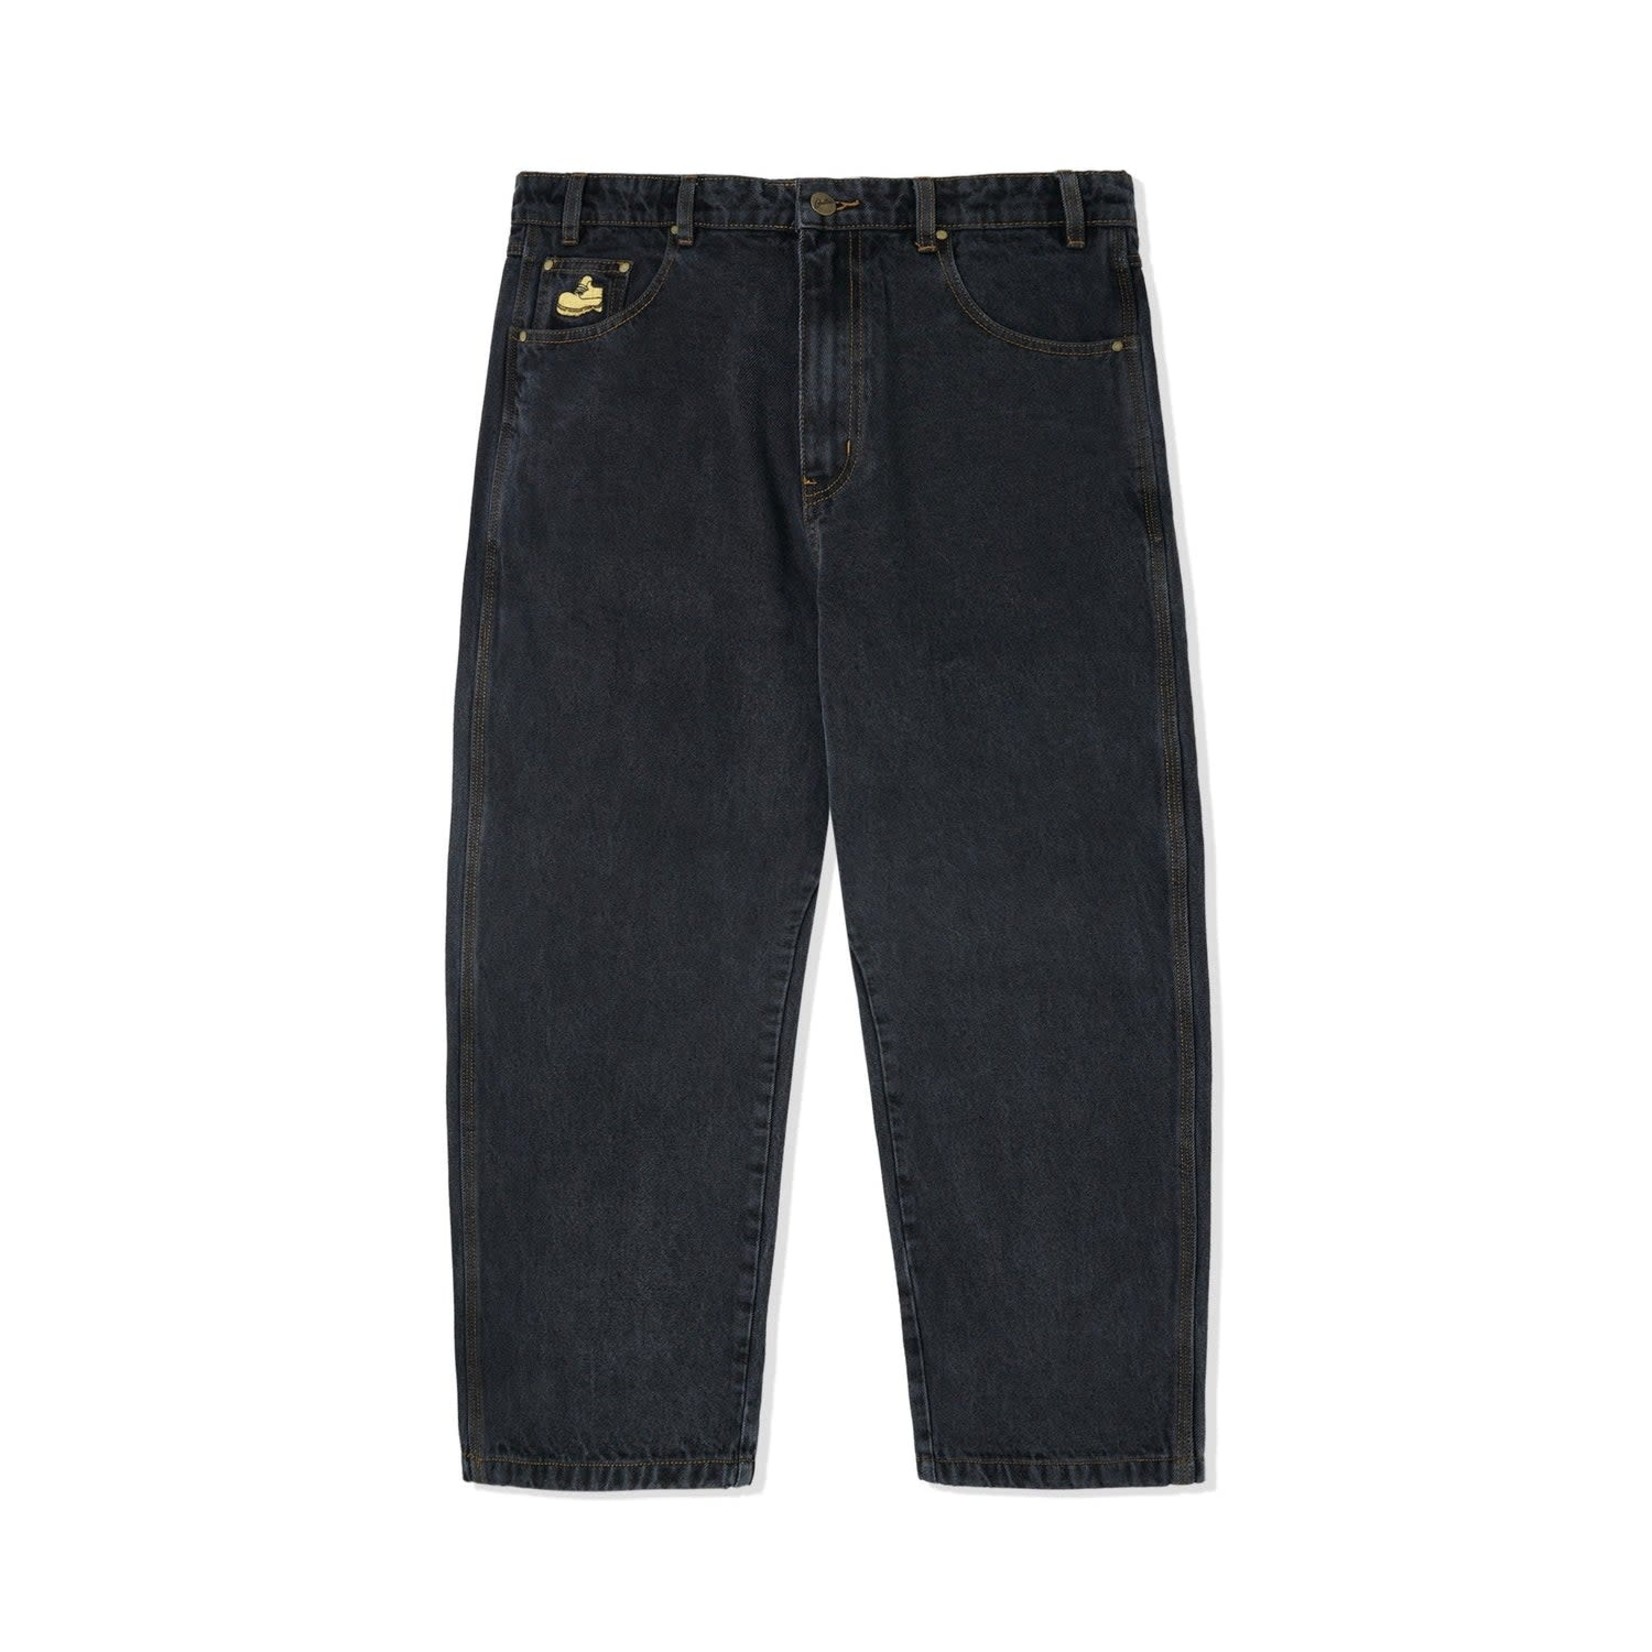 Butter Goods Butter Timbo Denim Pants, Washed Black